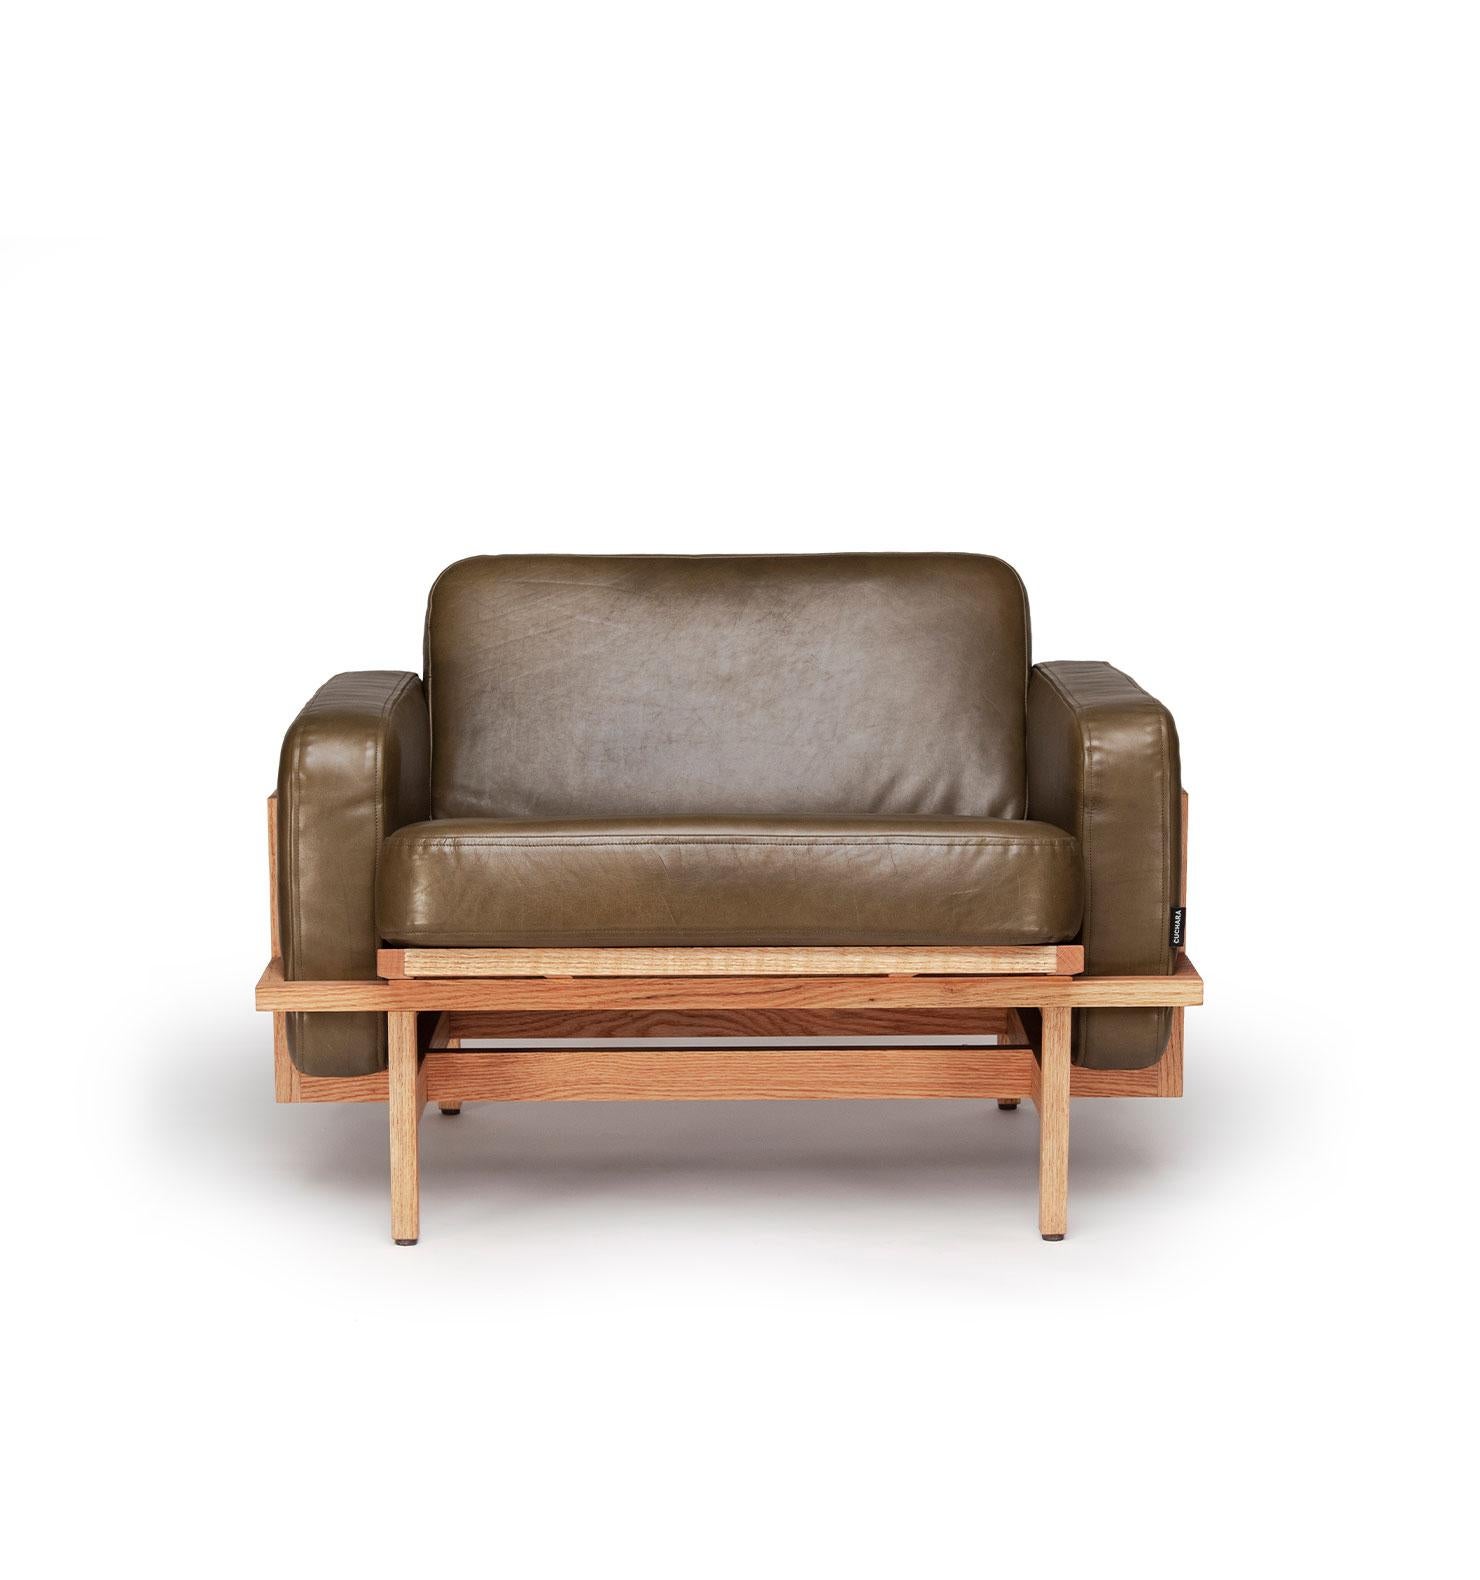 Woodwork Individual Lccc, Mexican Contemporary Armchair by Emiliano Molina for Cuchara For Sale